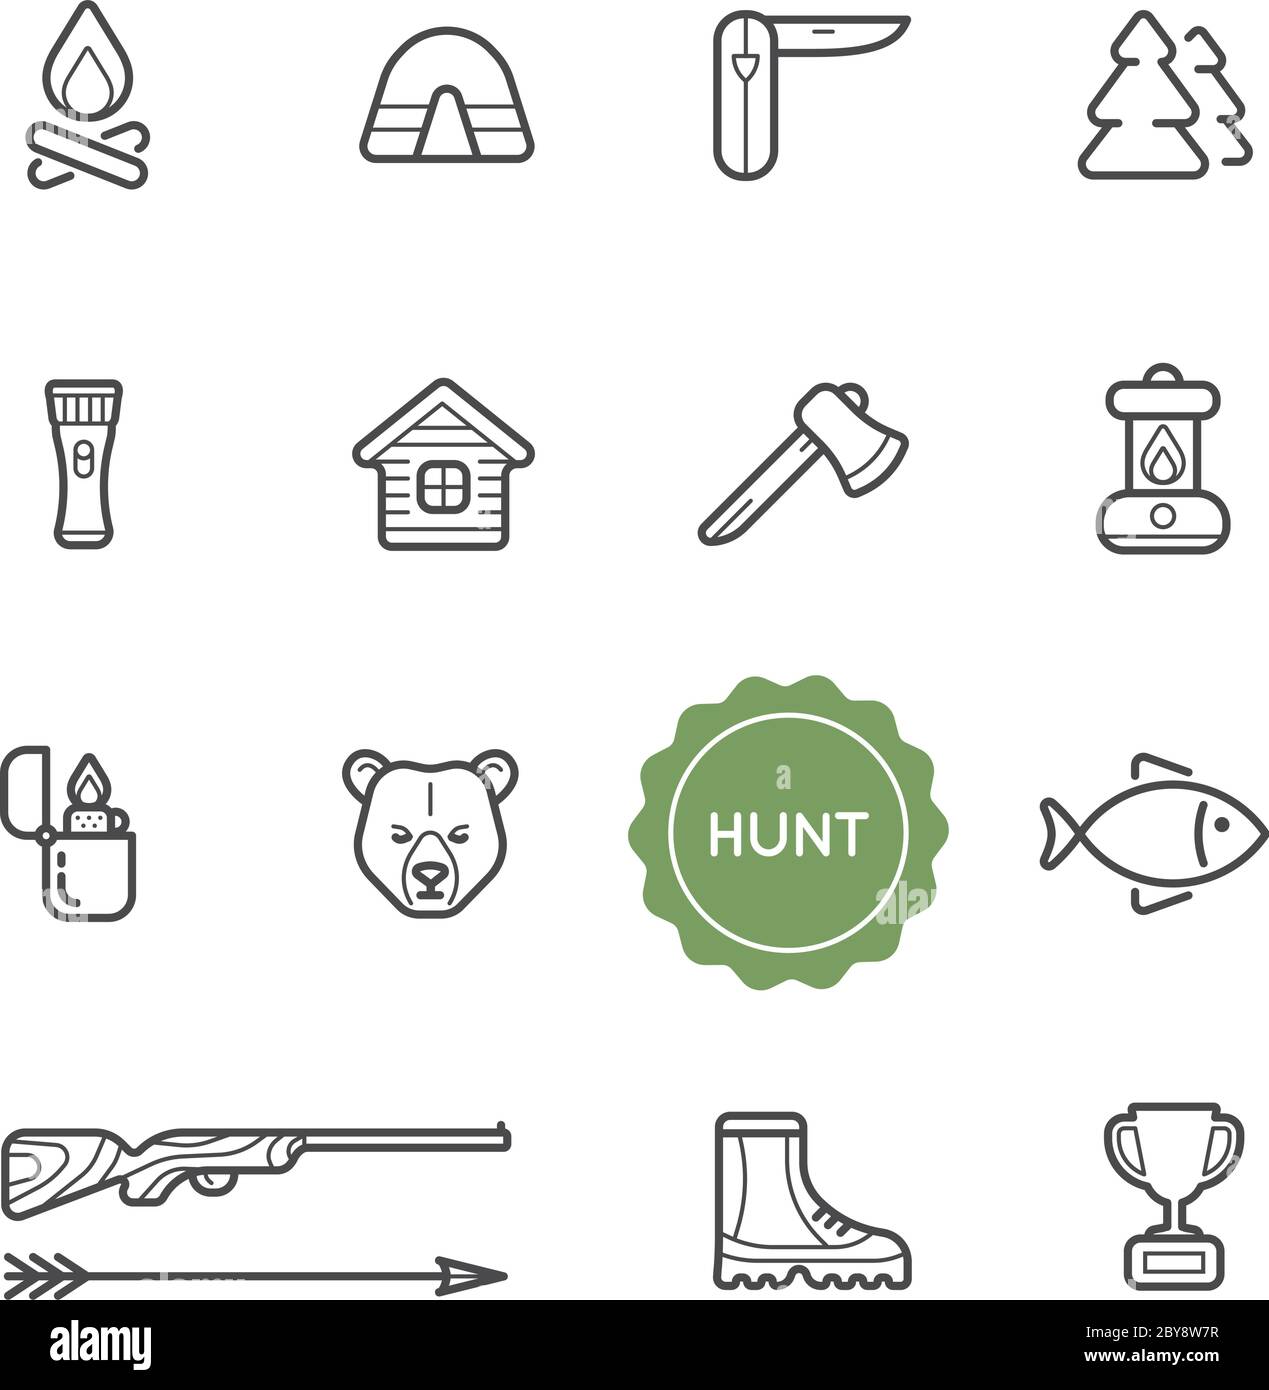 Set of Outdoor Hunting Vector Illustration Elements can be used as Logo or Icon in premium quality Stock Vector